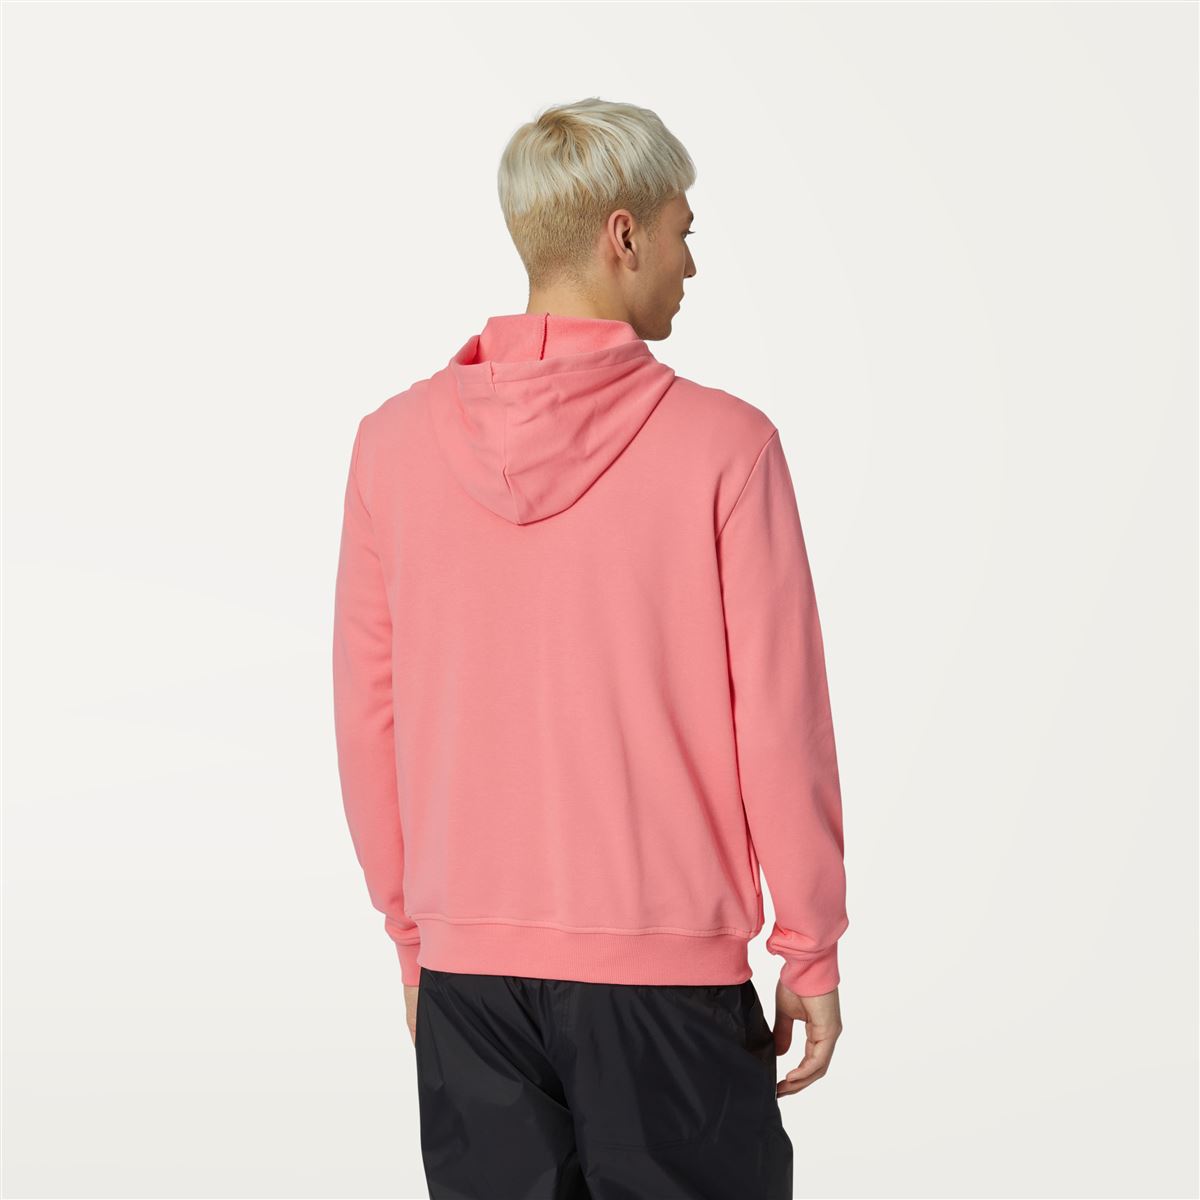 LE VRAI ARNEL POLY COTTON - SWEATERS - UNISEX - PINK MD